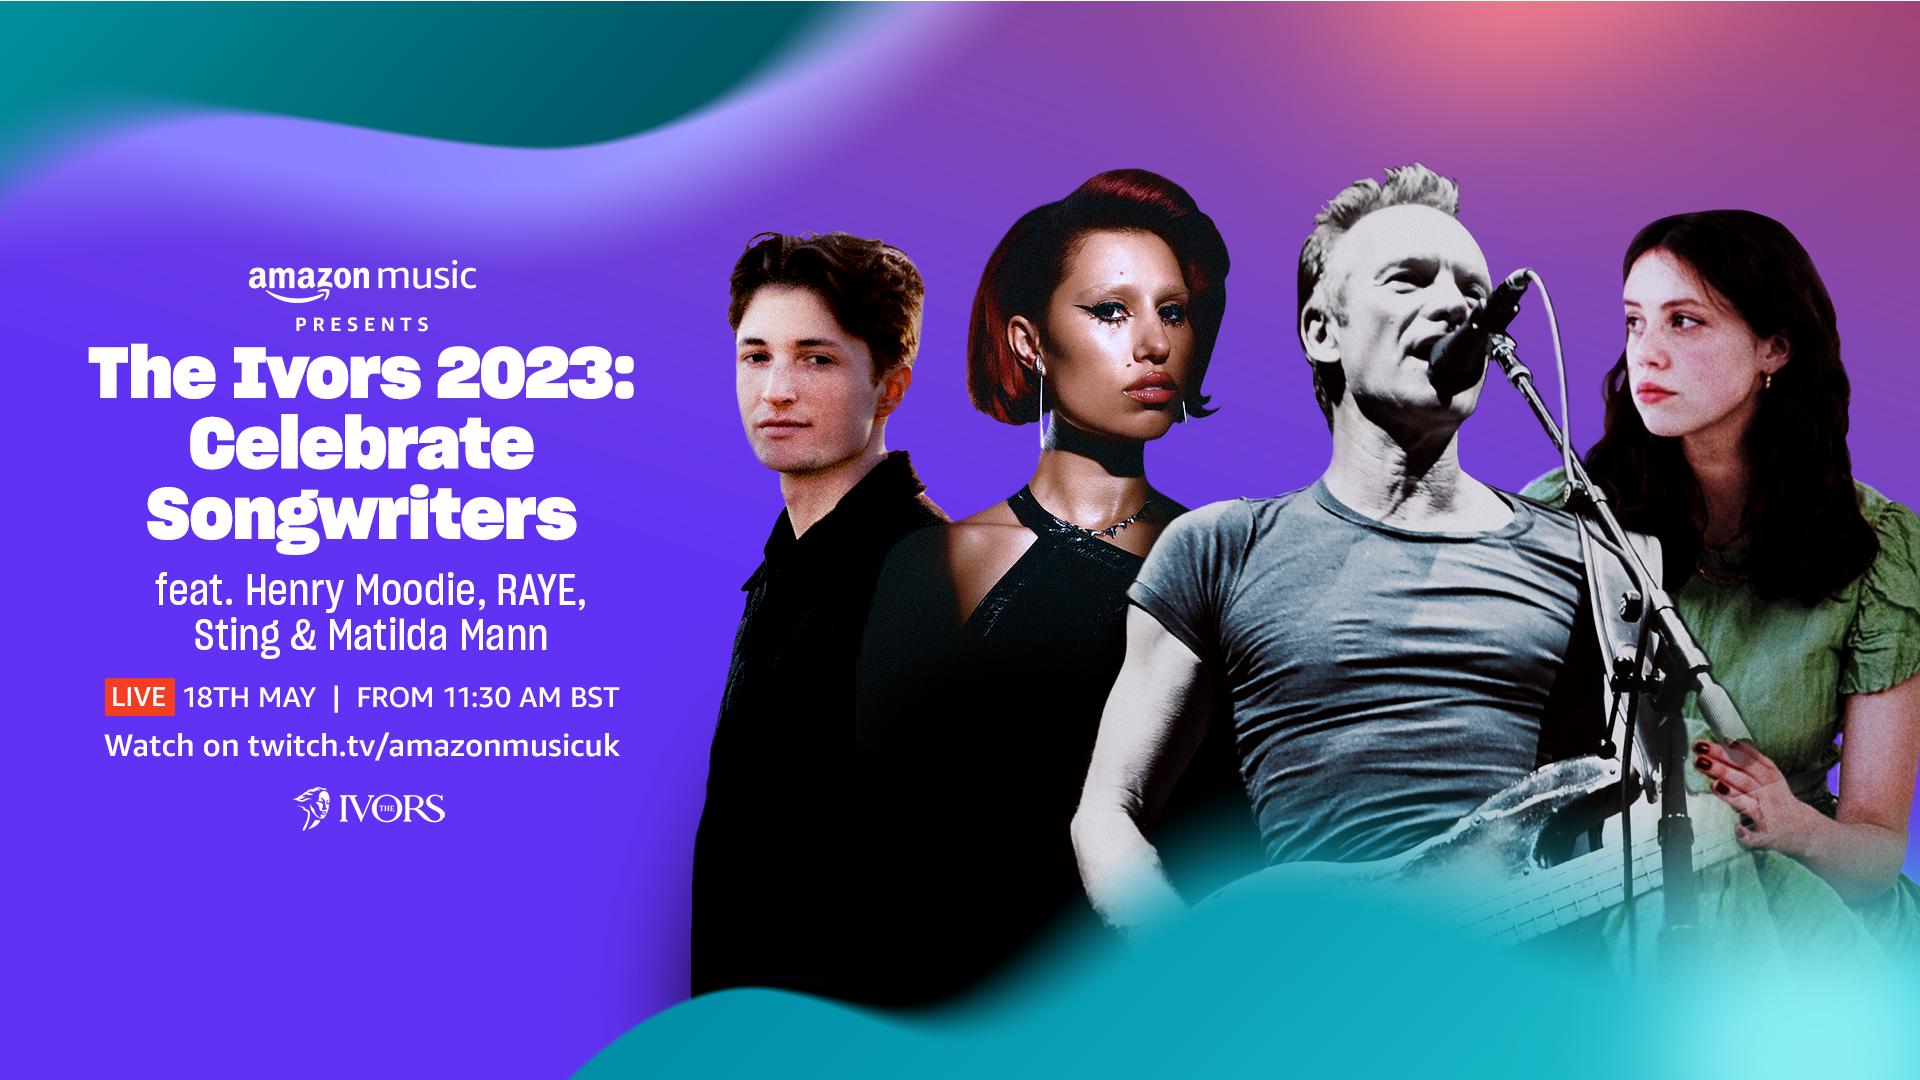 The Ivors 2023 livestream featuring Sting, Raye, Matilda Mann and Henry Moodie